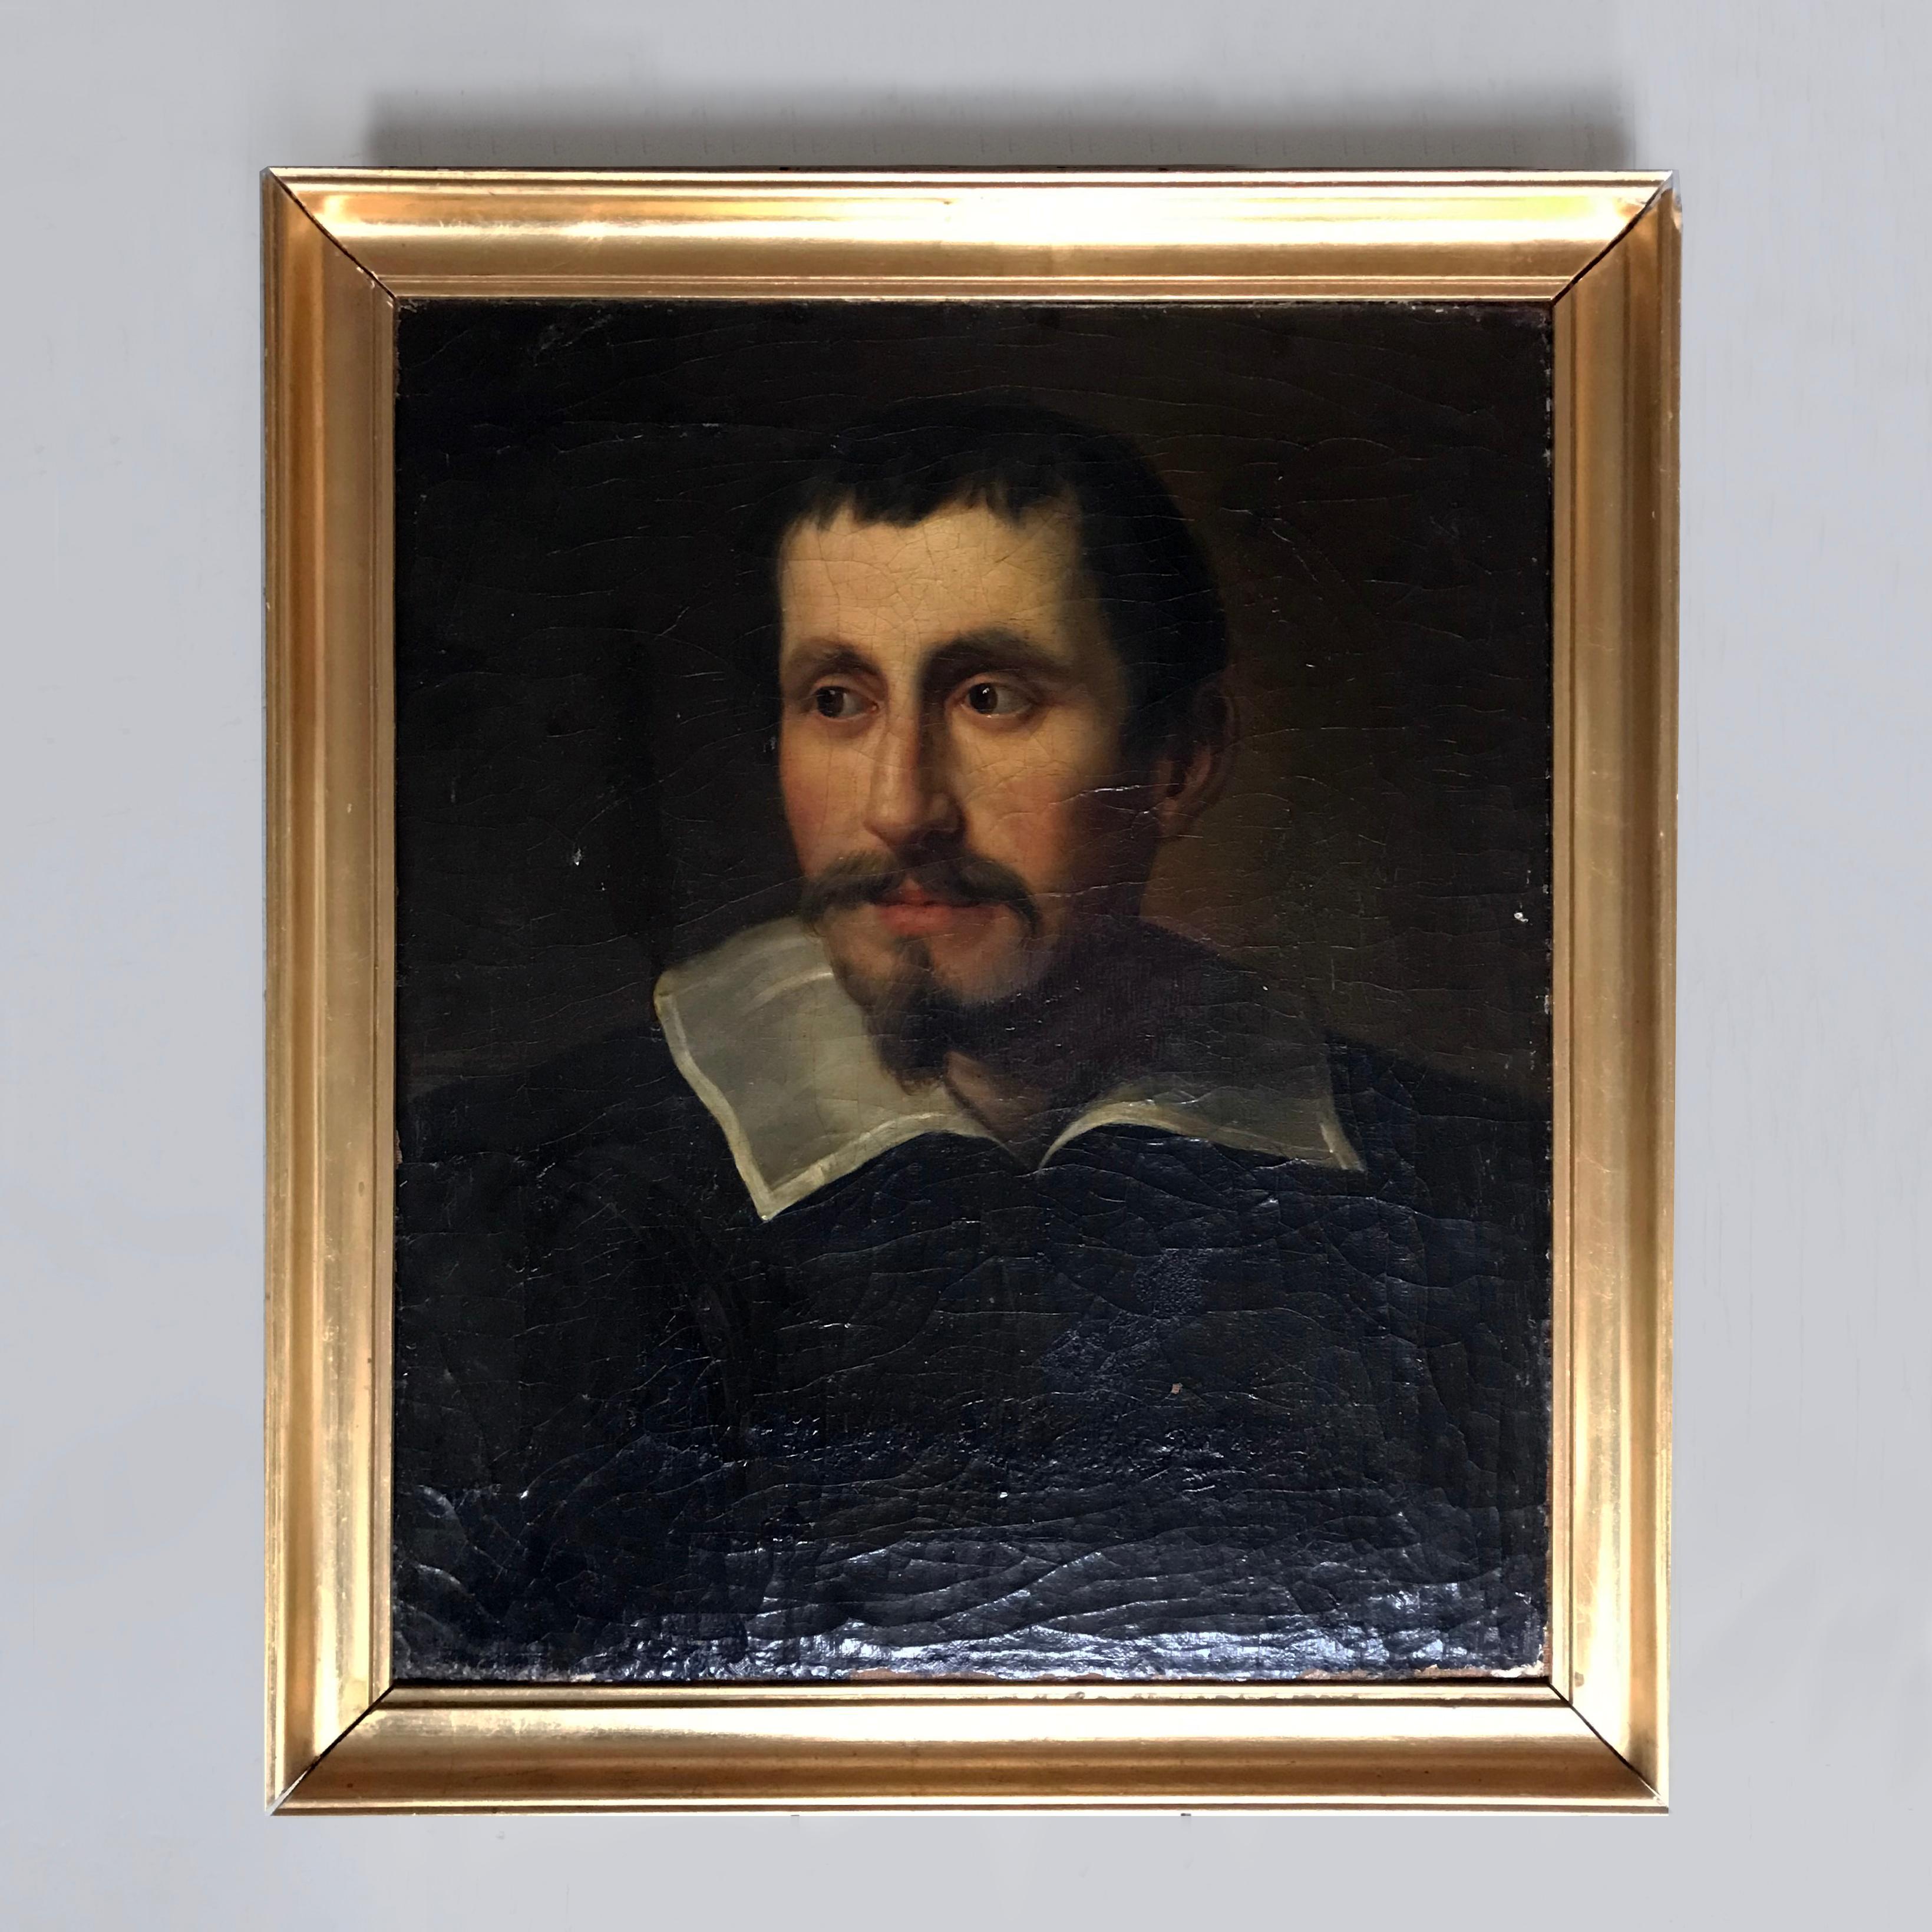 C19th Venetian oil painting of a gentleman, after Anthonius Van Dyck (1599-1641). Dated to back 1868.

A beautifully painted portrait with fine detailing in a wonderfully atmospheric palette.

Small damage to top right of frame.